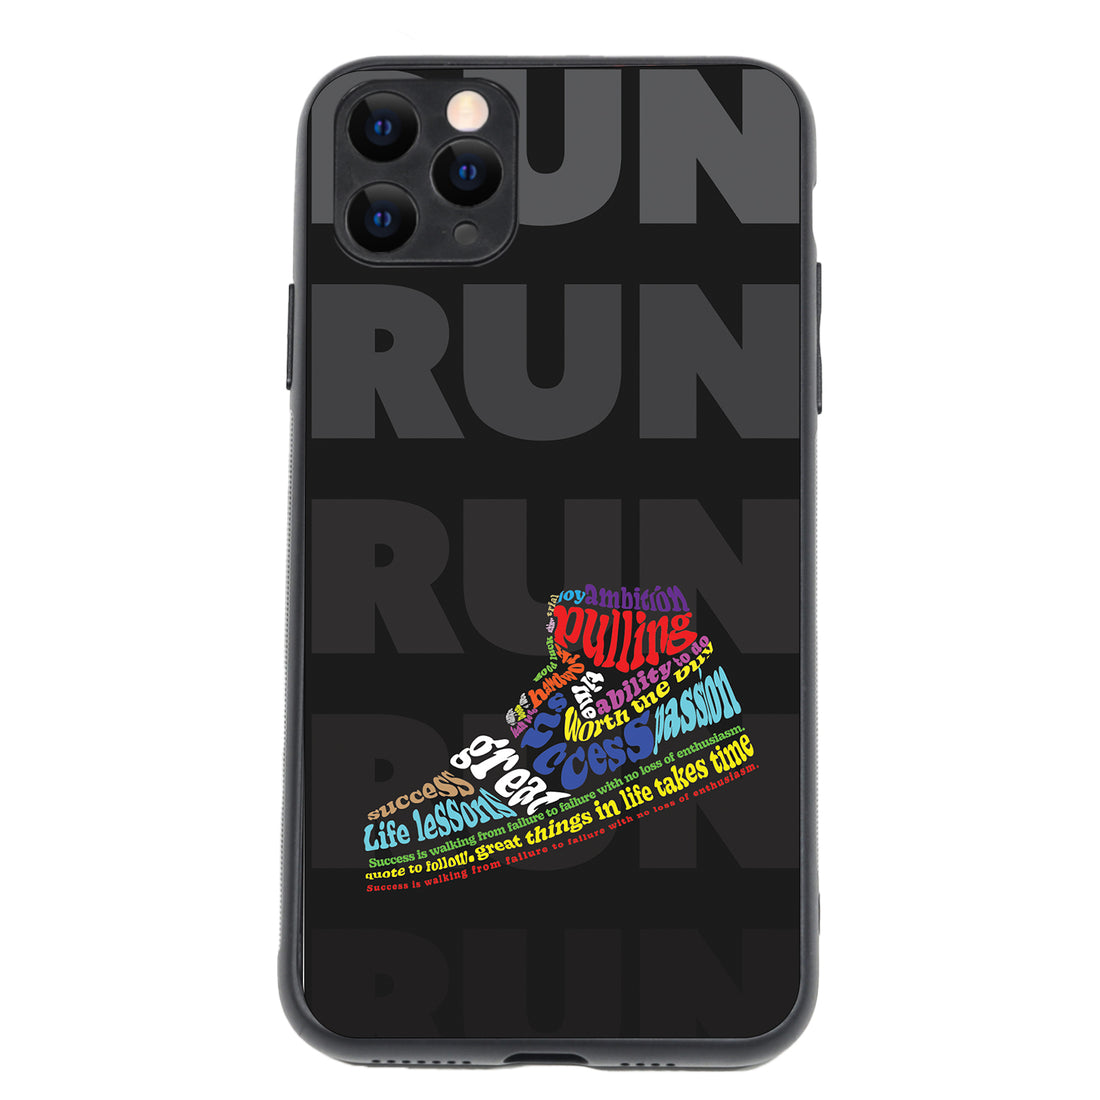 Sports Runner Sports iPhone 11 Pro Max Case